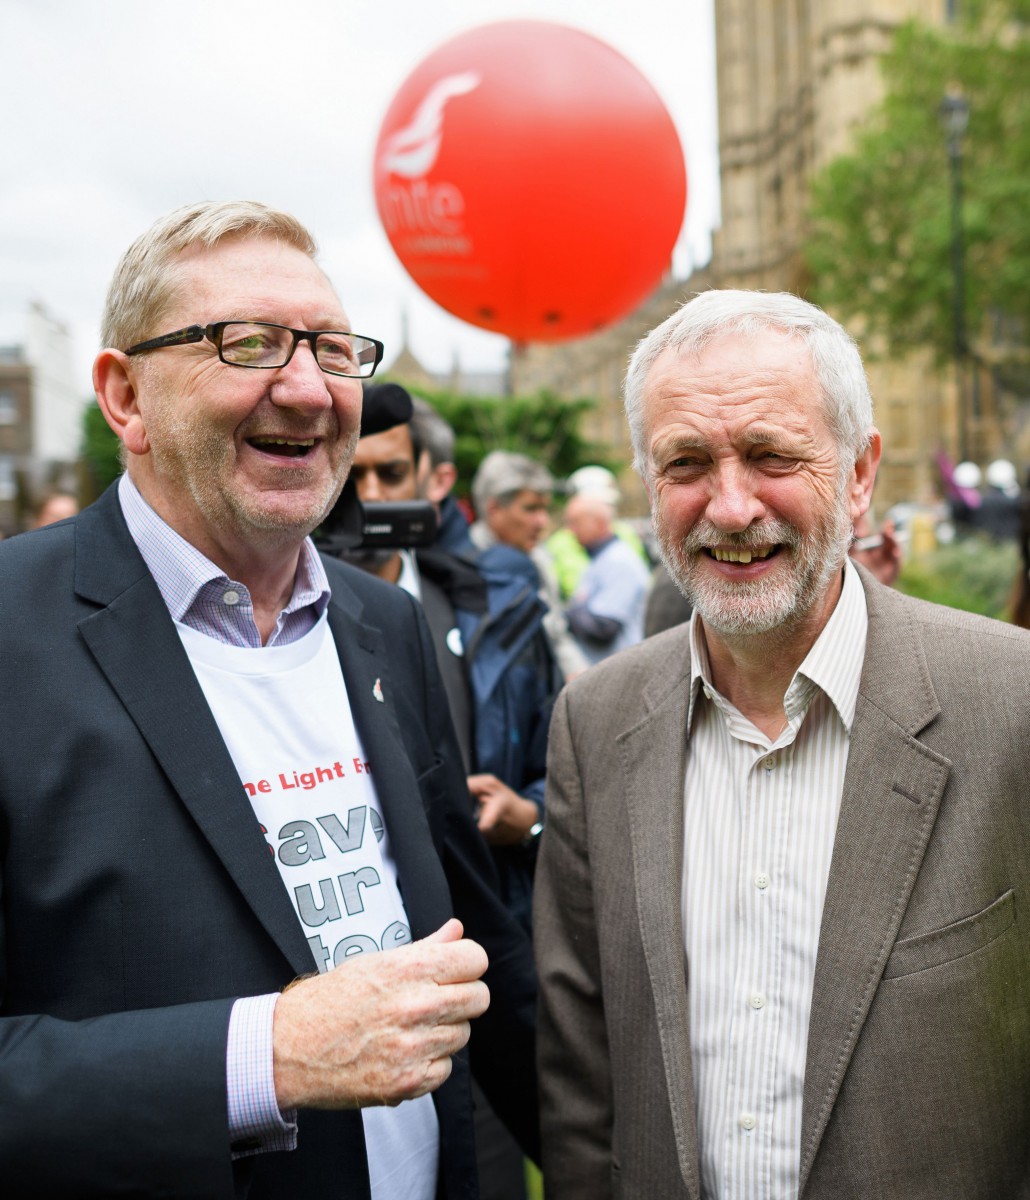 McCluskey said Brexit had been the Achilles Hell for Labour